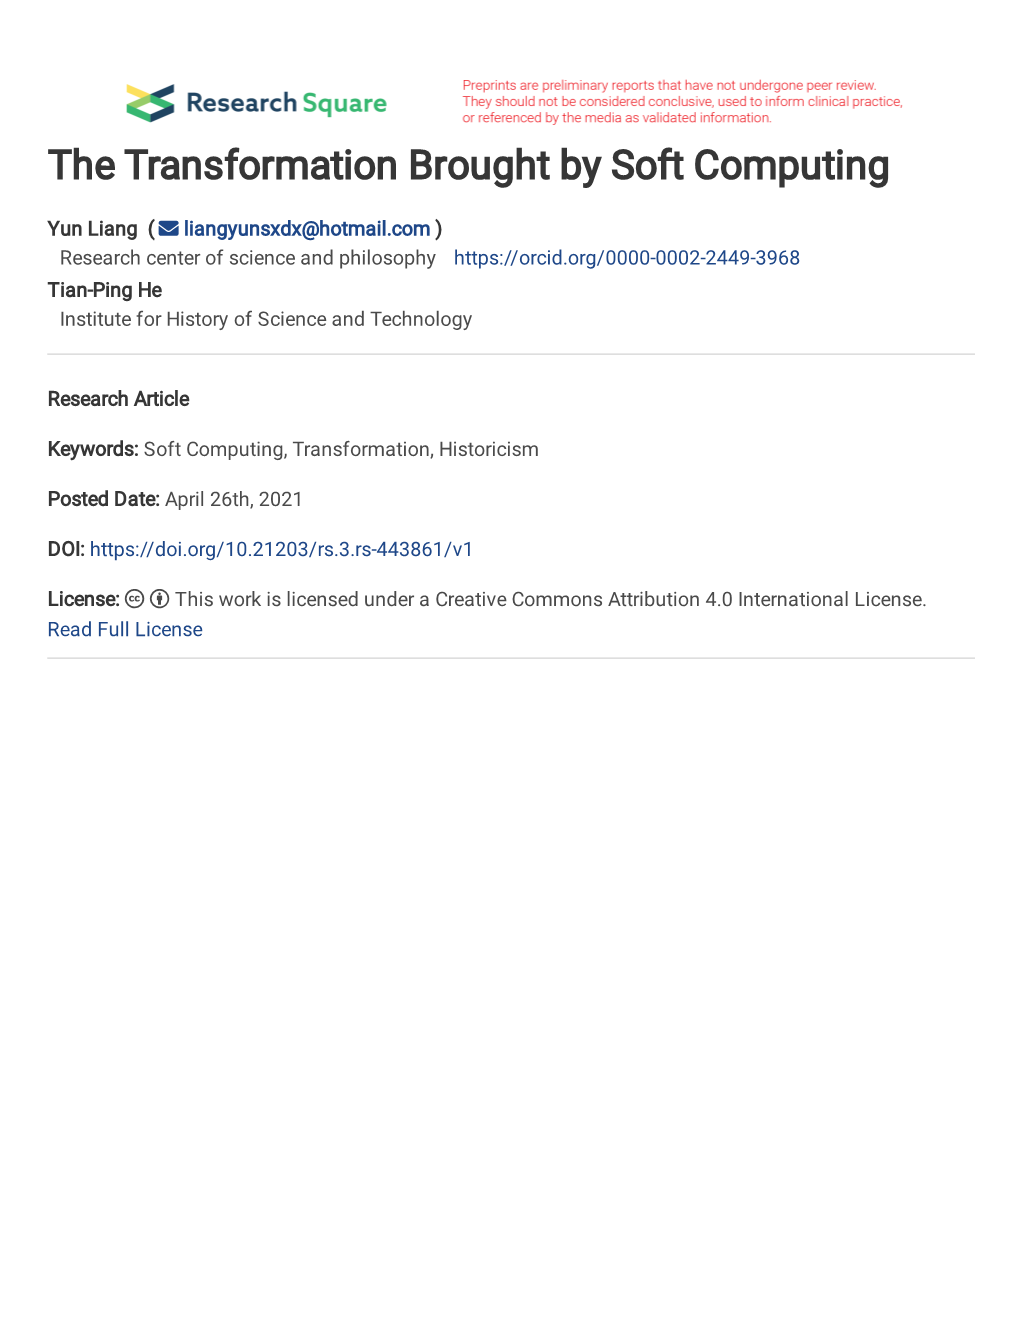 The Transformation Brought by Soft Computing